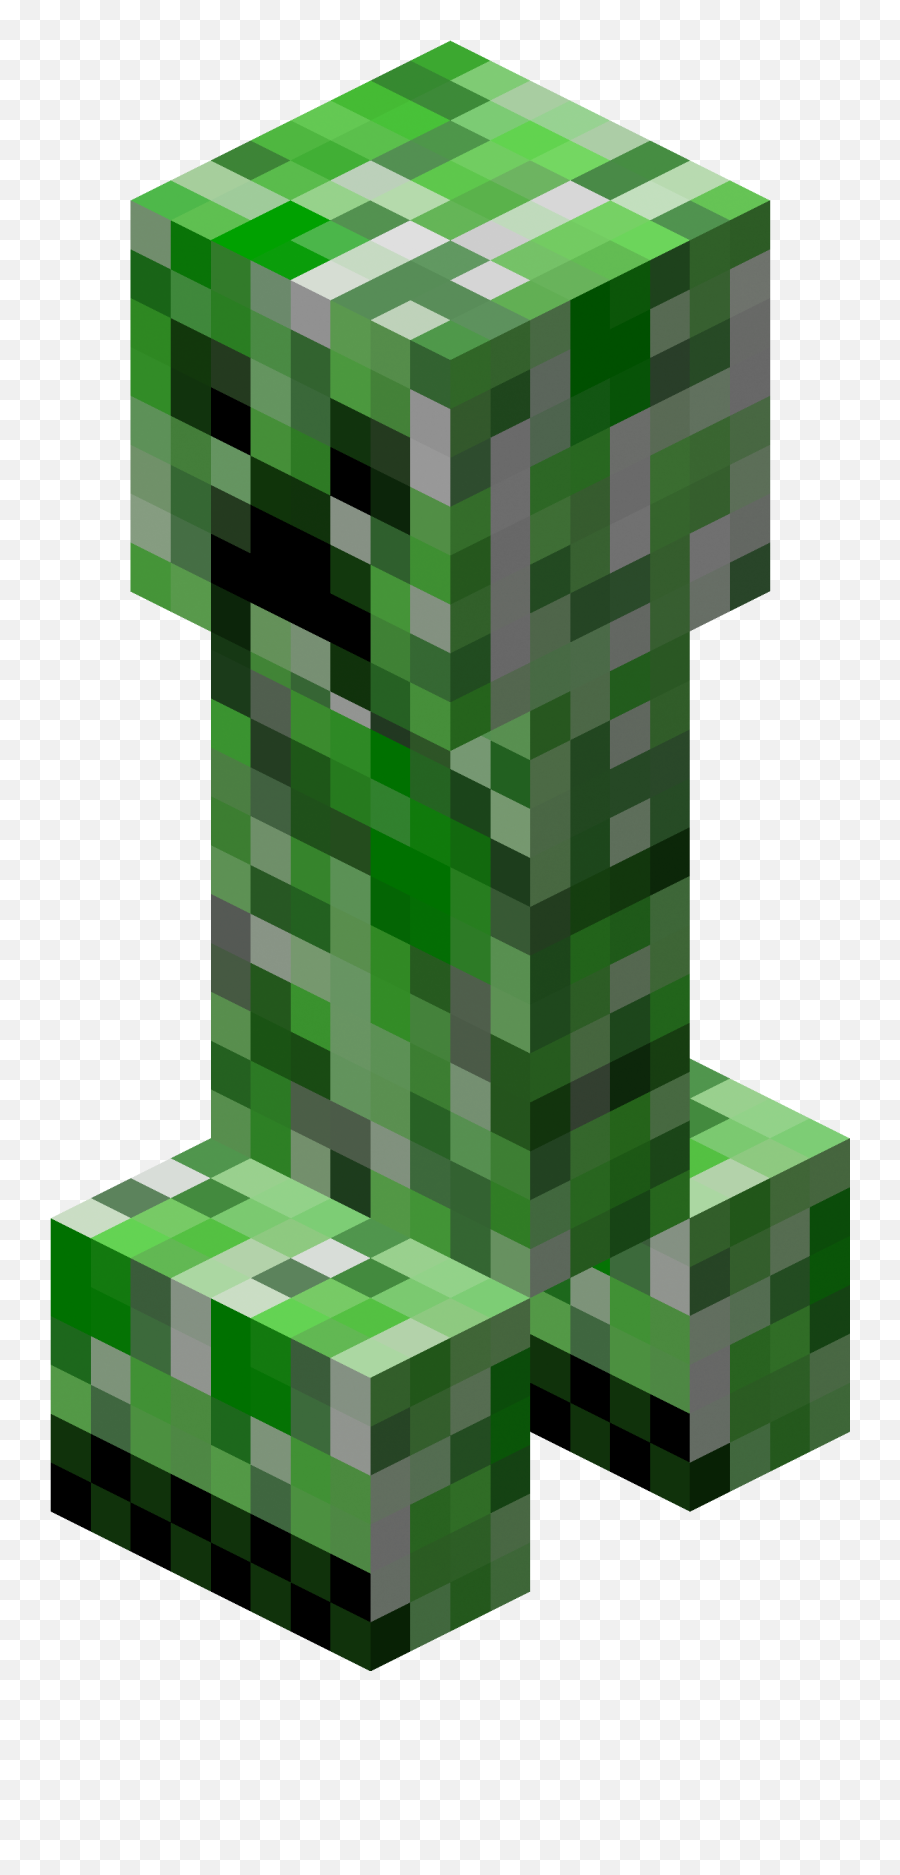 Download Free Png Minecraft Creeper Mob - Creeper Png,Minecraft Skeleton Png